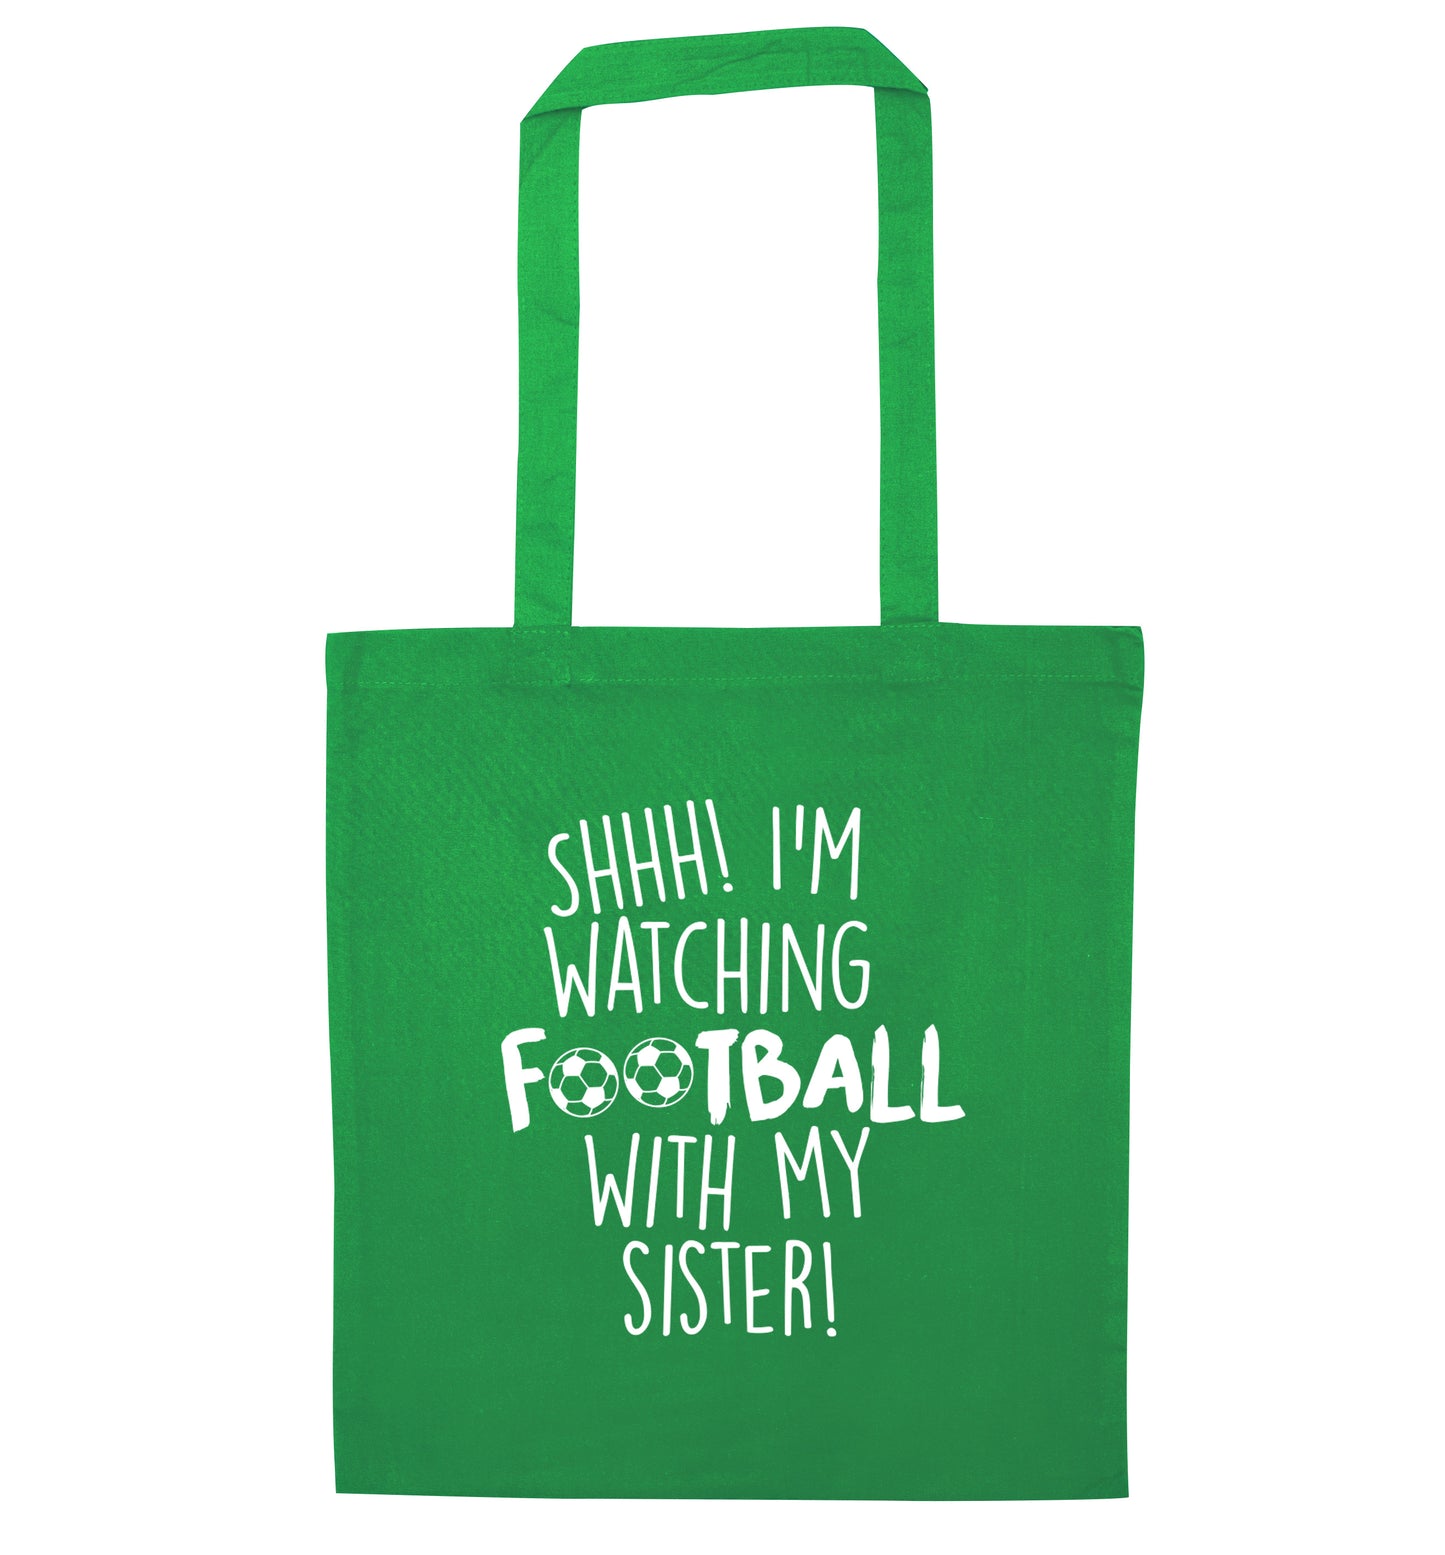 Shhh I'm watching football with my sister green tote bag